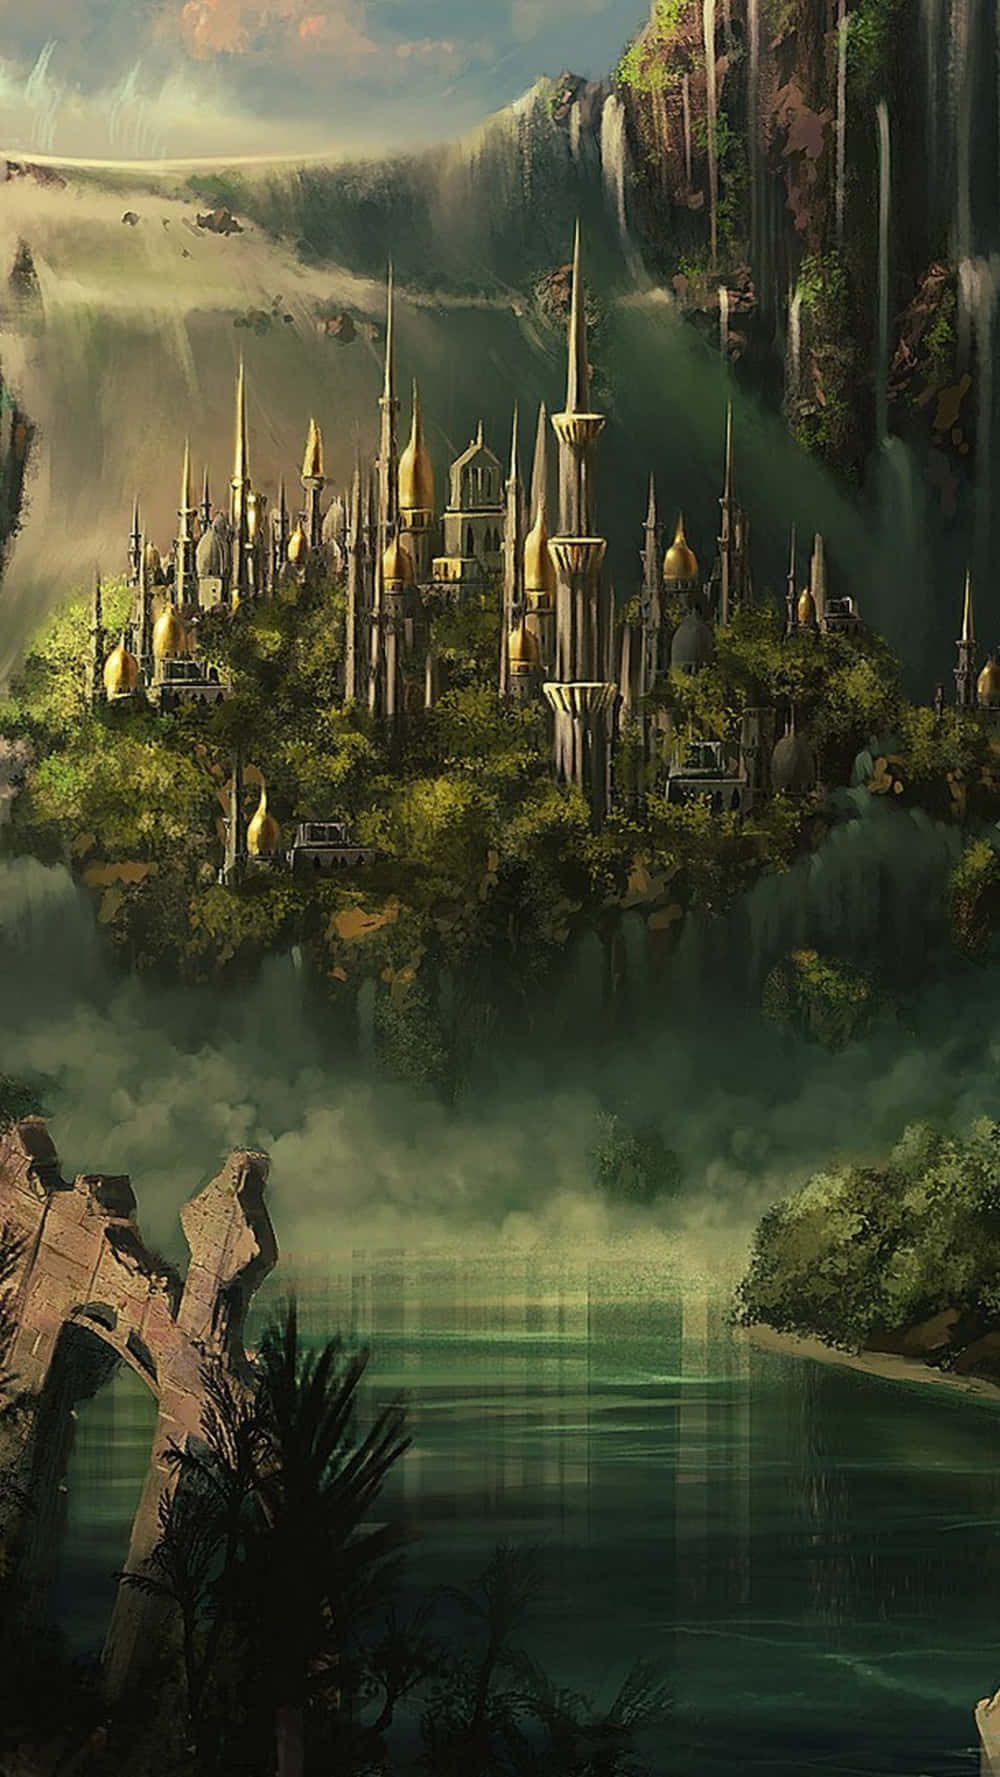 Enjoy a peaceful world of your own with Fantasy Phone Wallpaper